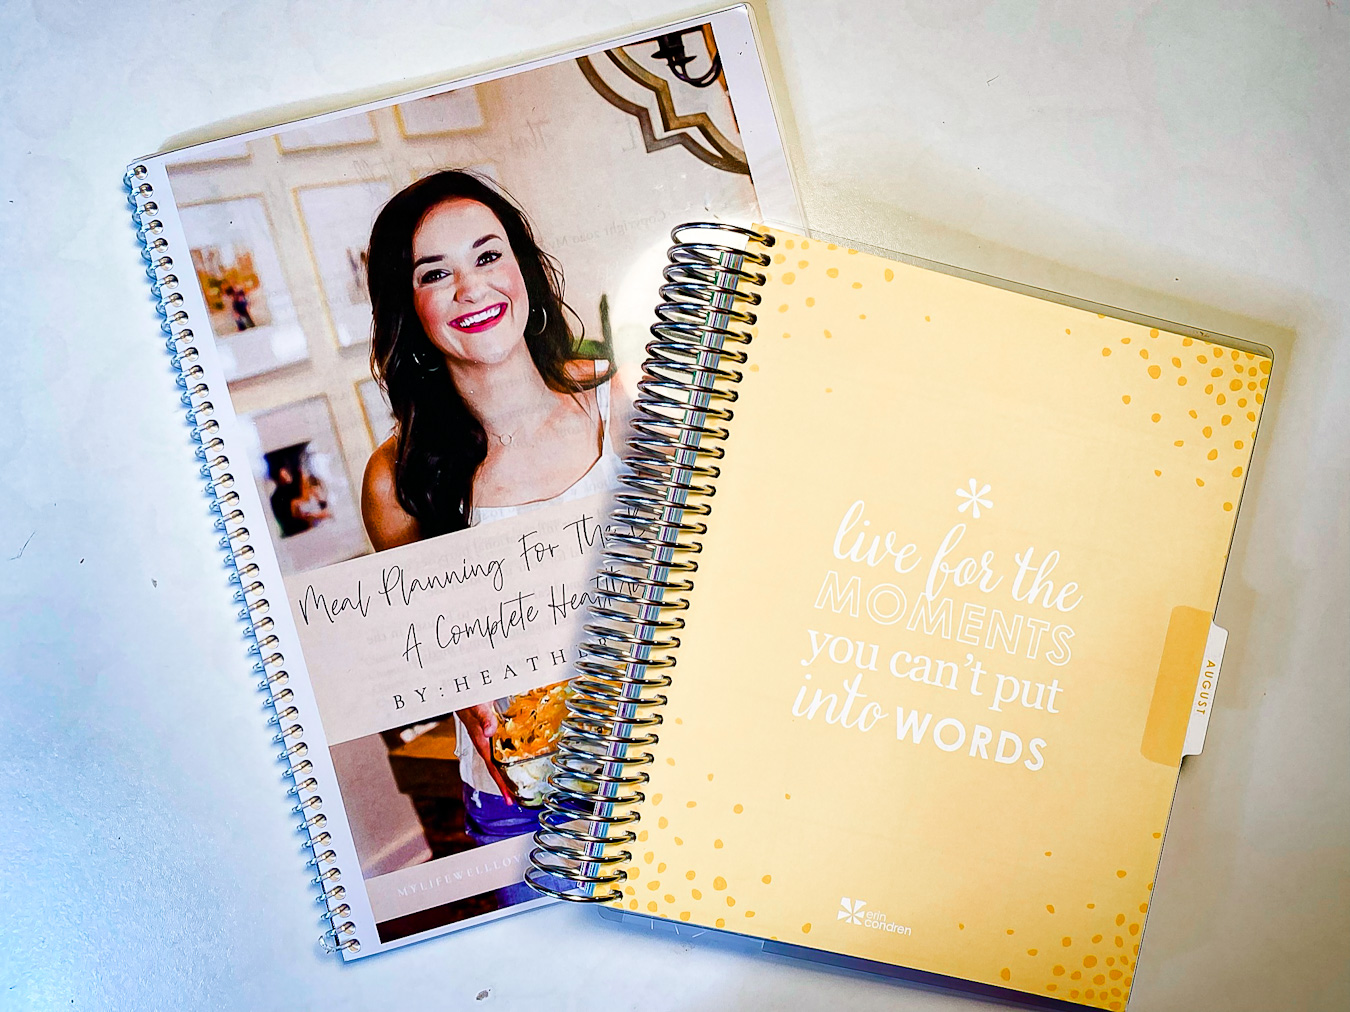 Mom + lifestyle blogger, My Life Well Loved, shares her unique end of year teacher gifts! Click NOW to see what ideas she came up with!